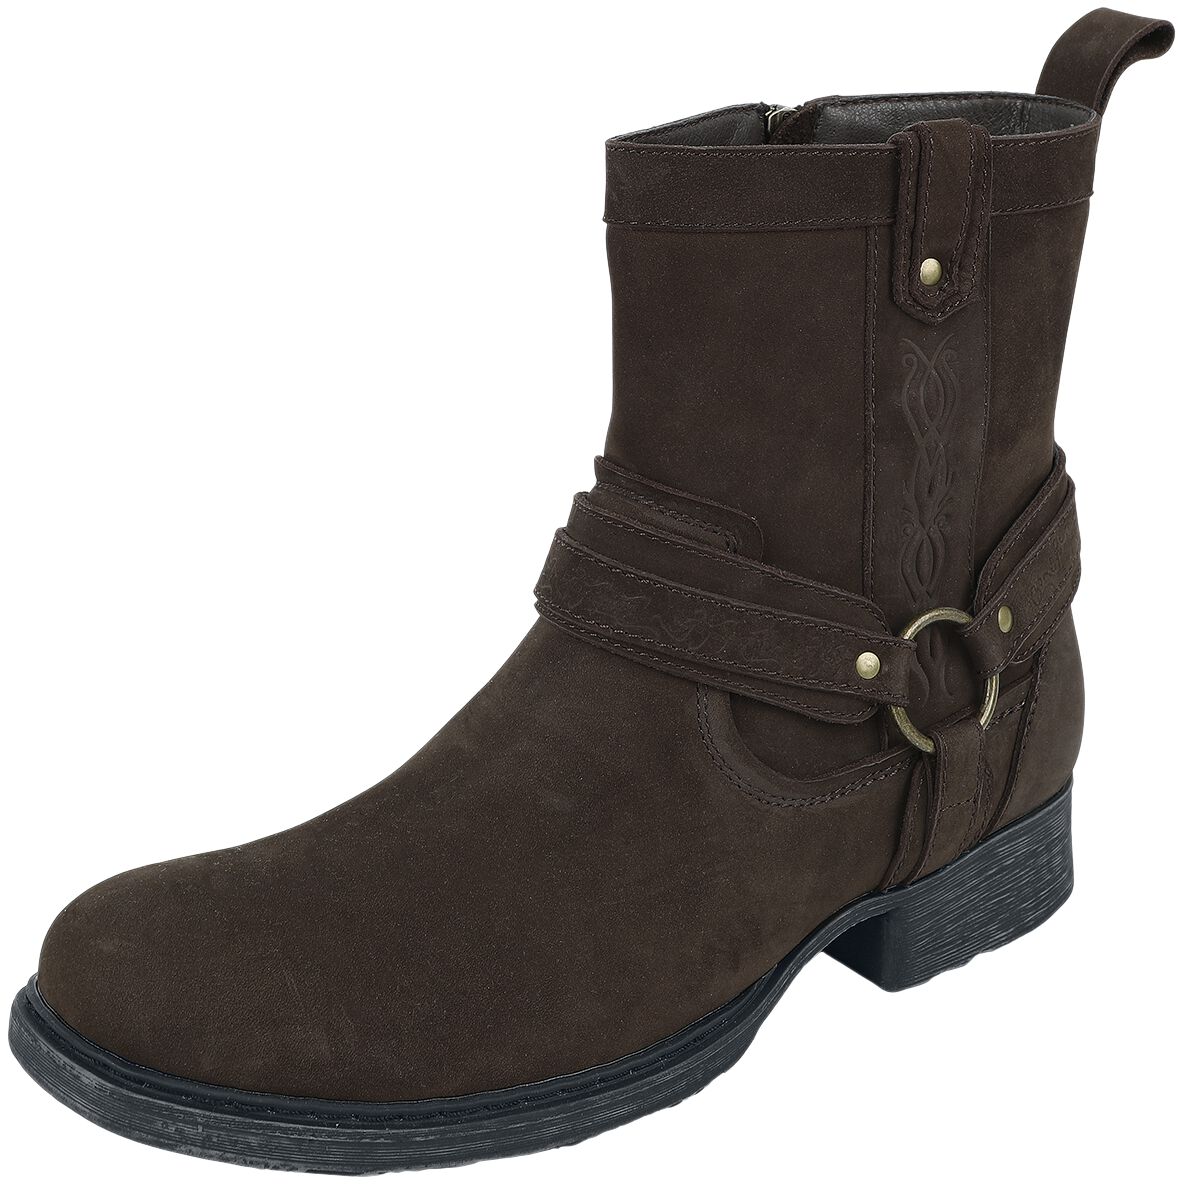 The Lord Of The Rings Dunedain Boots brown